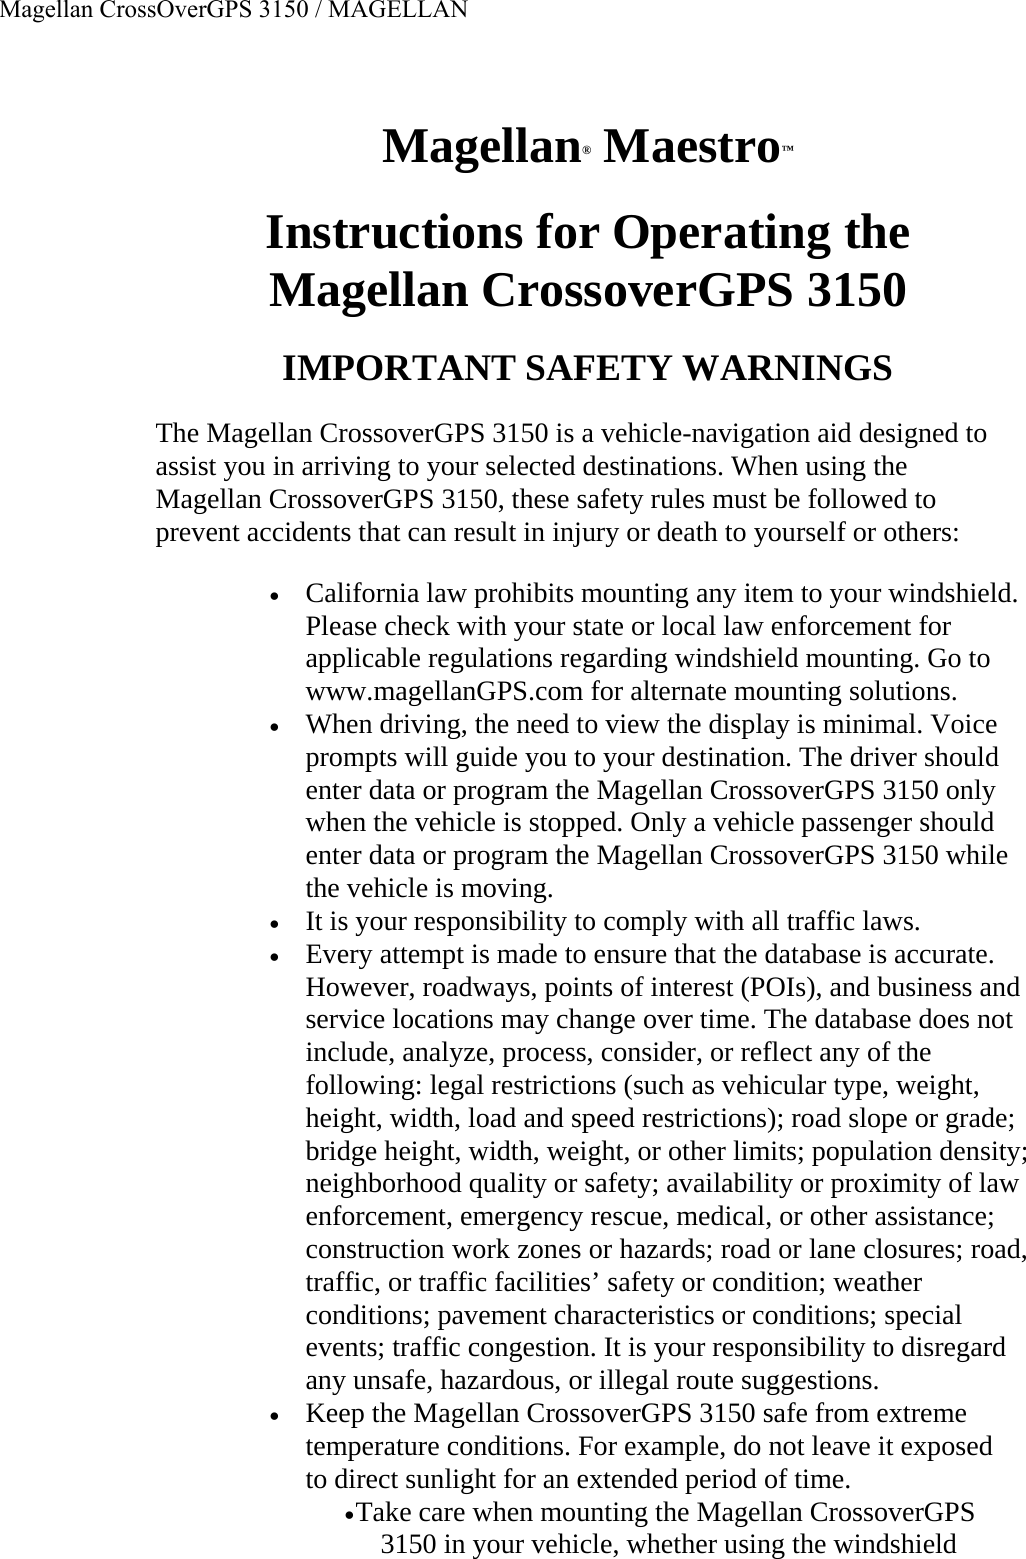 Magellan® Maestro™  Instructions for Operating the  Magellan CrossoverGPS 3150  IMPORTANT SAFETY WARNINGS  The Magellan CrossoverGPS 3150 is a vehicle-navigation aid designed to assist you in arriving to your selected destinations. When using the Magellan CrossoverGPS 3150, these safety rules must be followed to prevent accidents that can result in injury or death to yourself or others:  • California law prohibits mounting any item to your windshield. Please check with your state or local law enforcement for applicable regulations regarding windshield mounting. Go to www.magellanGPS.com for alternate mounting solutions.  • When driving, the need to view the display is minimal. Voice prompts will guide you to your destination. The driver should enter data or program the Magellan CrossoverGPS 3150 only when the vehicle is stopped. Only a vehicle passenger should enter data or program the Magellan CrossoverGPS 3150 while the vehicle is moving.  • It is your responsibility to comply with all traffic laws.  • Every attempt is made to ensure that the database is accurate. However, roadways, points of interest (POIs), and business and service locations may change over time. The database does not include, analyze, process, consider, or reflect any of the following: legal restrictions (such as vehicular type, weight, height, width, load and speed restrictions); road slope or grade; bridge height, width, weight, or other limits; population density; neighborhood quality or safety; availability or proximity of law enforcement, emergency rescue, medical, or other assistance; construction work zones or hazards; road or lane closures; road, traffic, or traffic facilities’ safety or condition; weather conditions; pavement characteristics or conditions; special events; traffic congestion. It is your responsibility to disregard any unsafe, hazardous, or illegal route suggestions.  • Keep the Magellan CrossoverGPS 3150 safe from extreme temperature conditions. For example, do not leave it exposed to direct sunlight for an extended period of time.  • Take care when mounting the Magellan CrossoverGPS 3150 in your vehicle, whether using the windshield Magellan CrossOverGPS 3150 / MAGELLAN